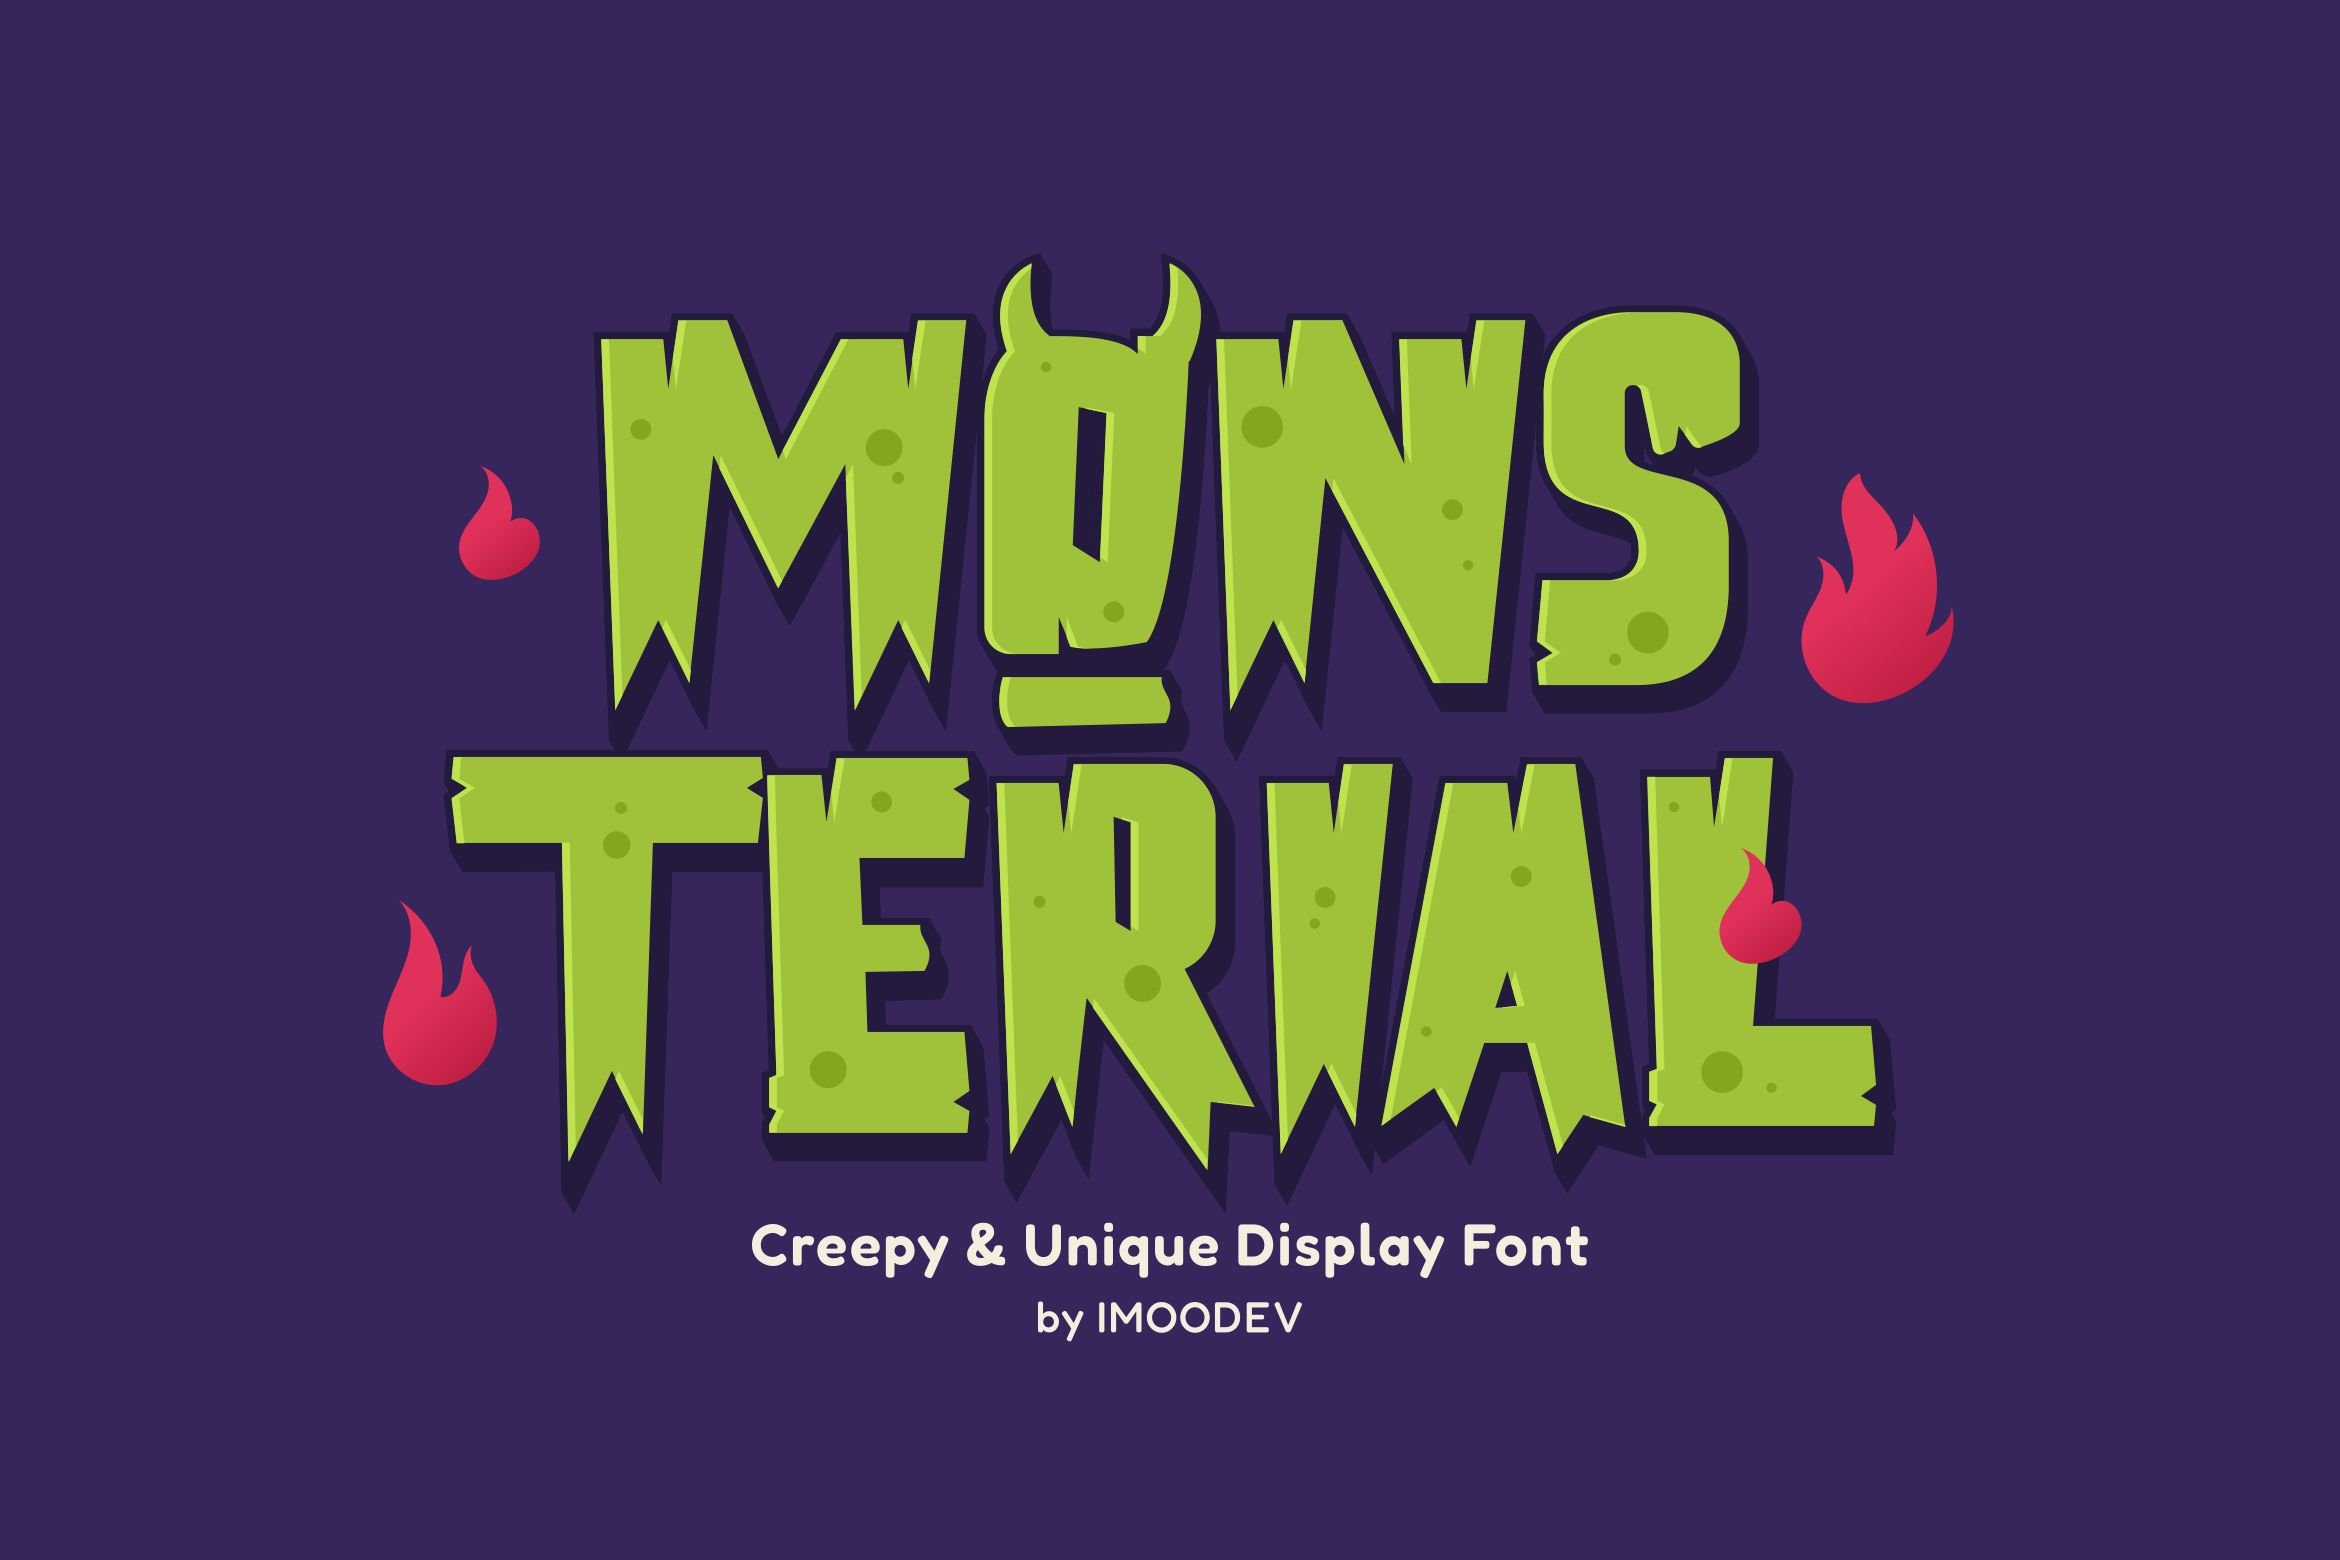 Mons Terial - Spooky Font cover image.